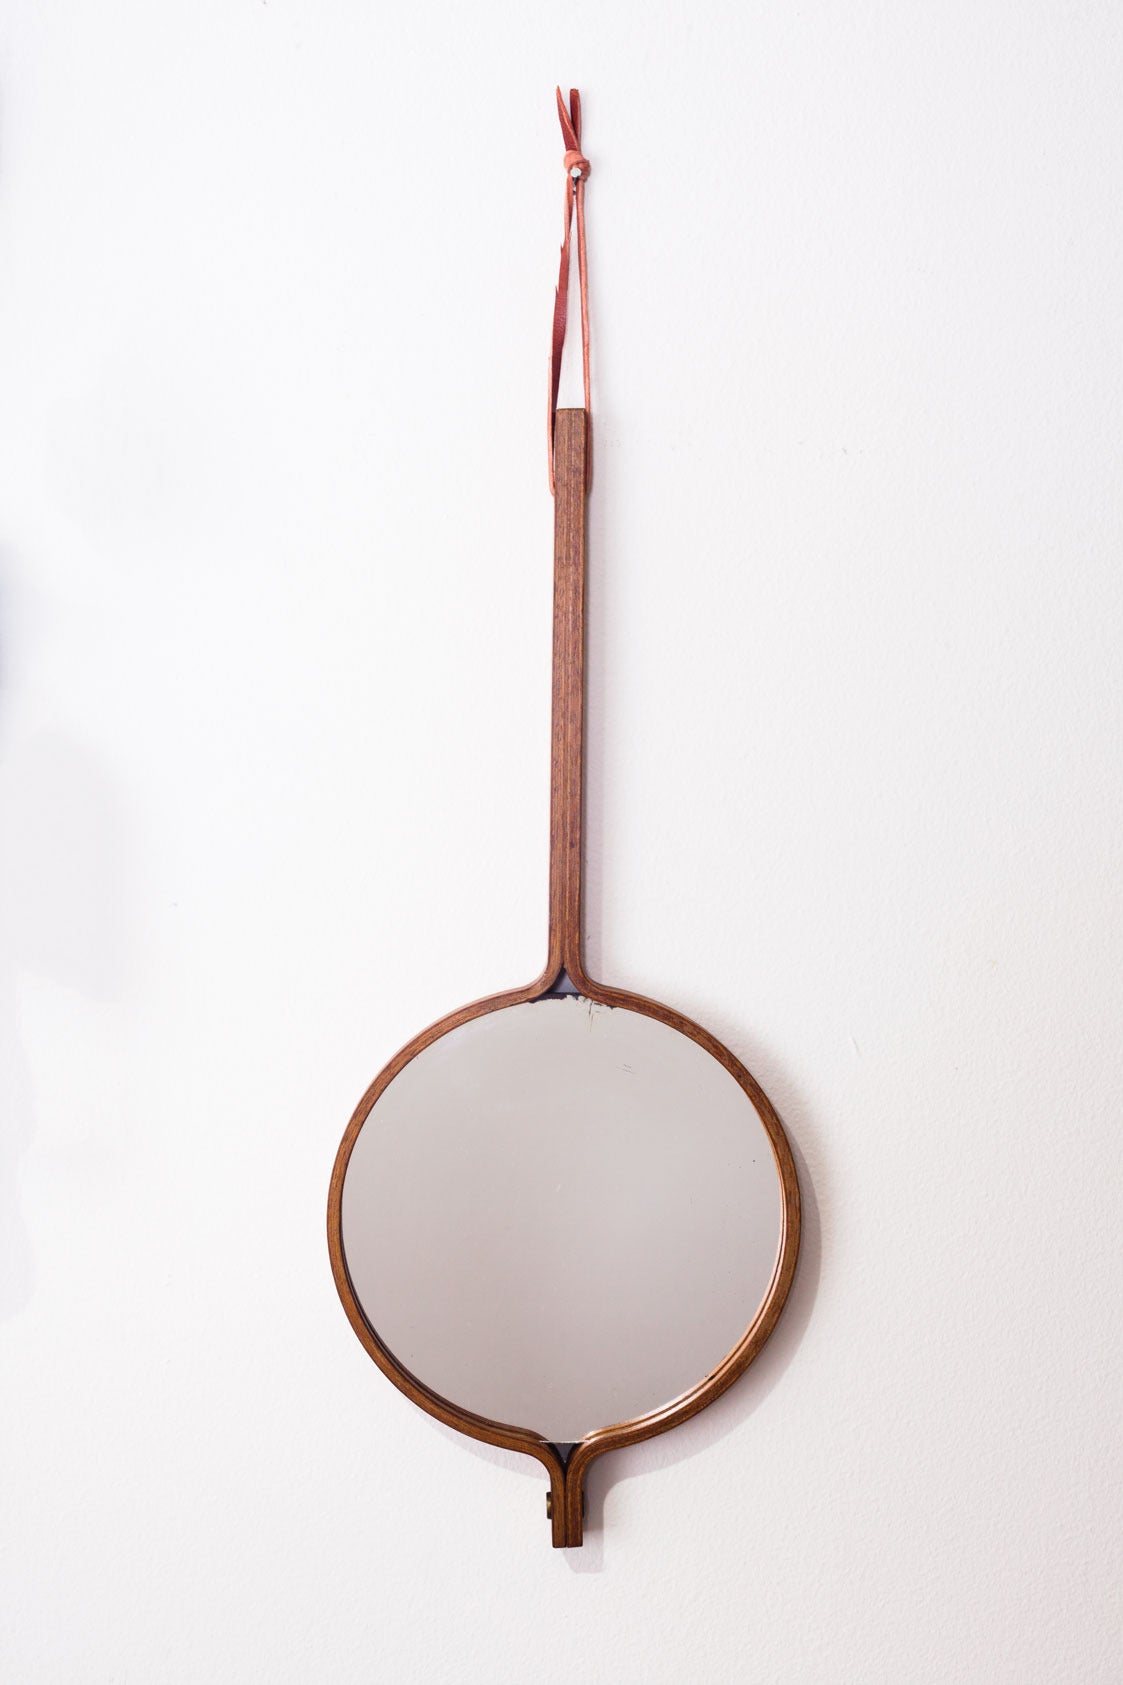 Teak mirror by Hans-Agne Jakobsson for Hans-Agne Jakobsson Markaryd, Sweden, 1950s. Can be used both as a hand mirror or as a wall mirror hung by its leather strap. Smooth lines and natural wood grain.

After studying architecture Hans-Agne